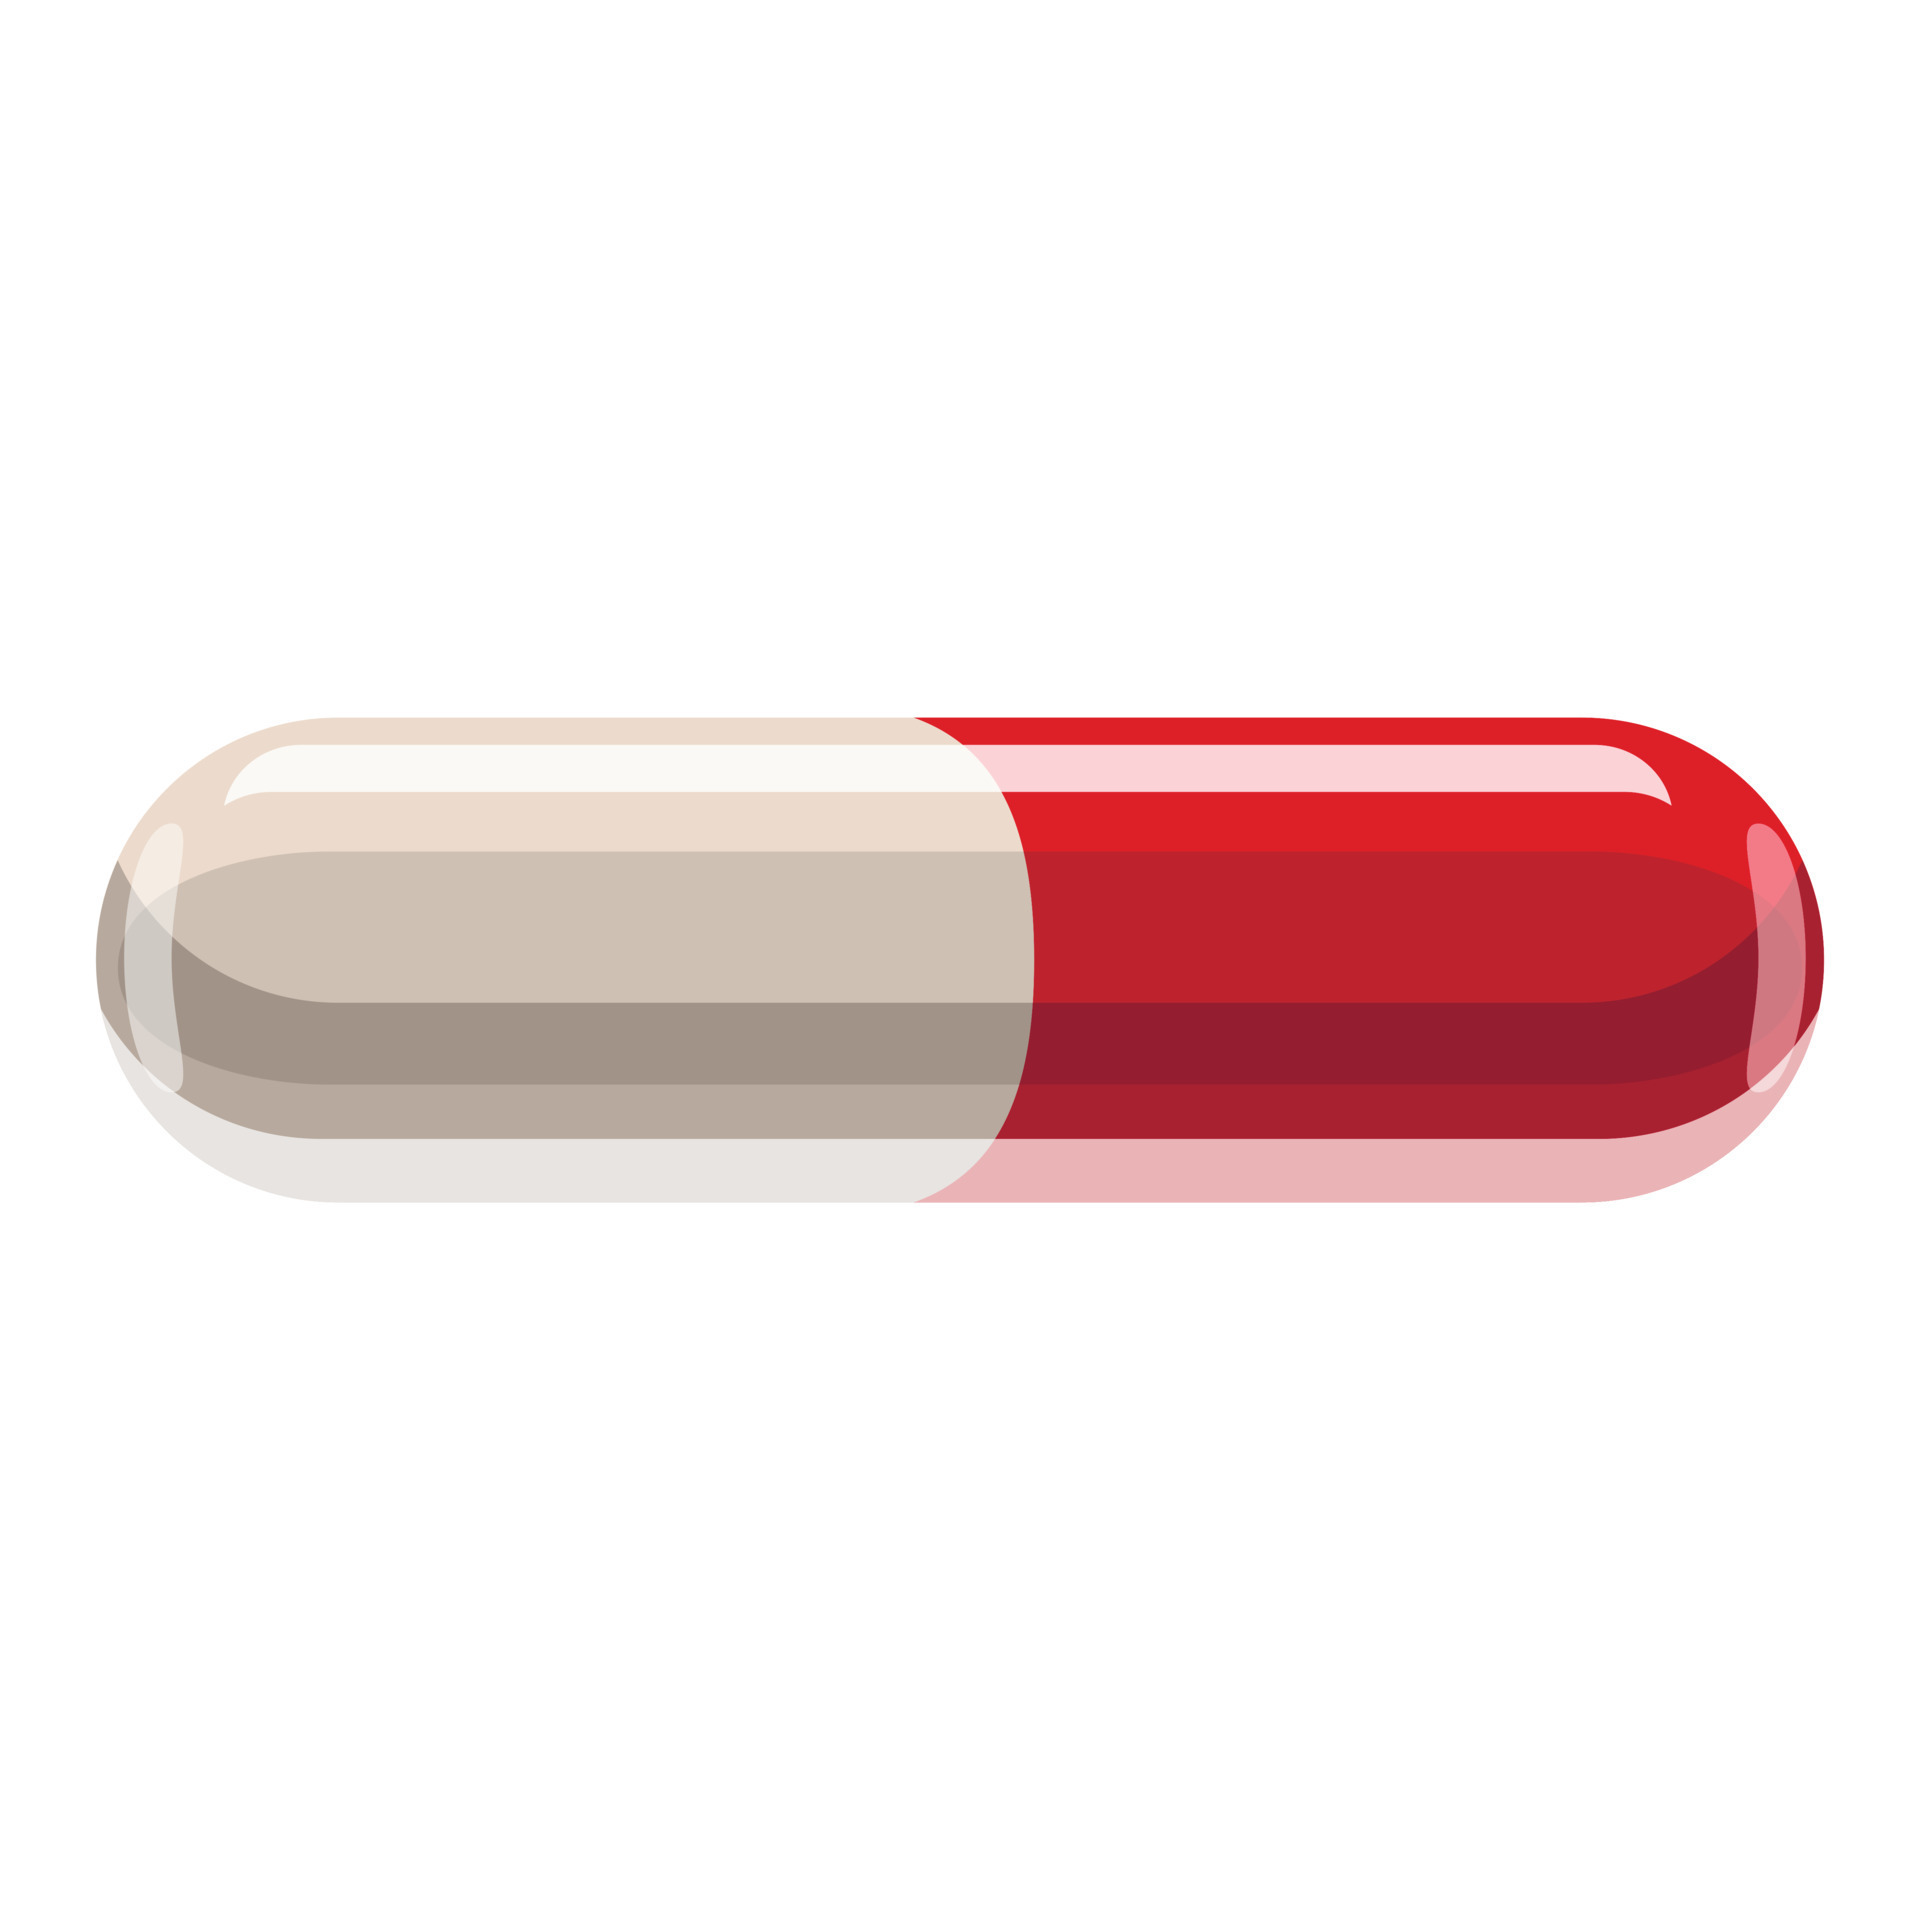 Red and white capsule pill icon, style 15070991 Vector Vecteezy